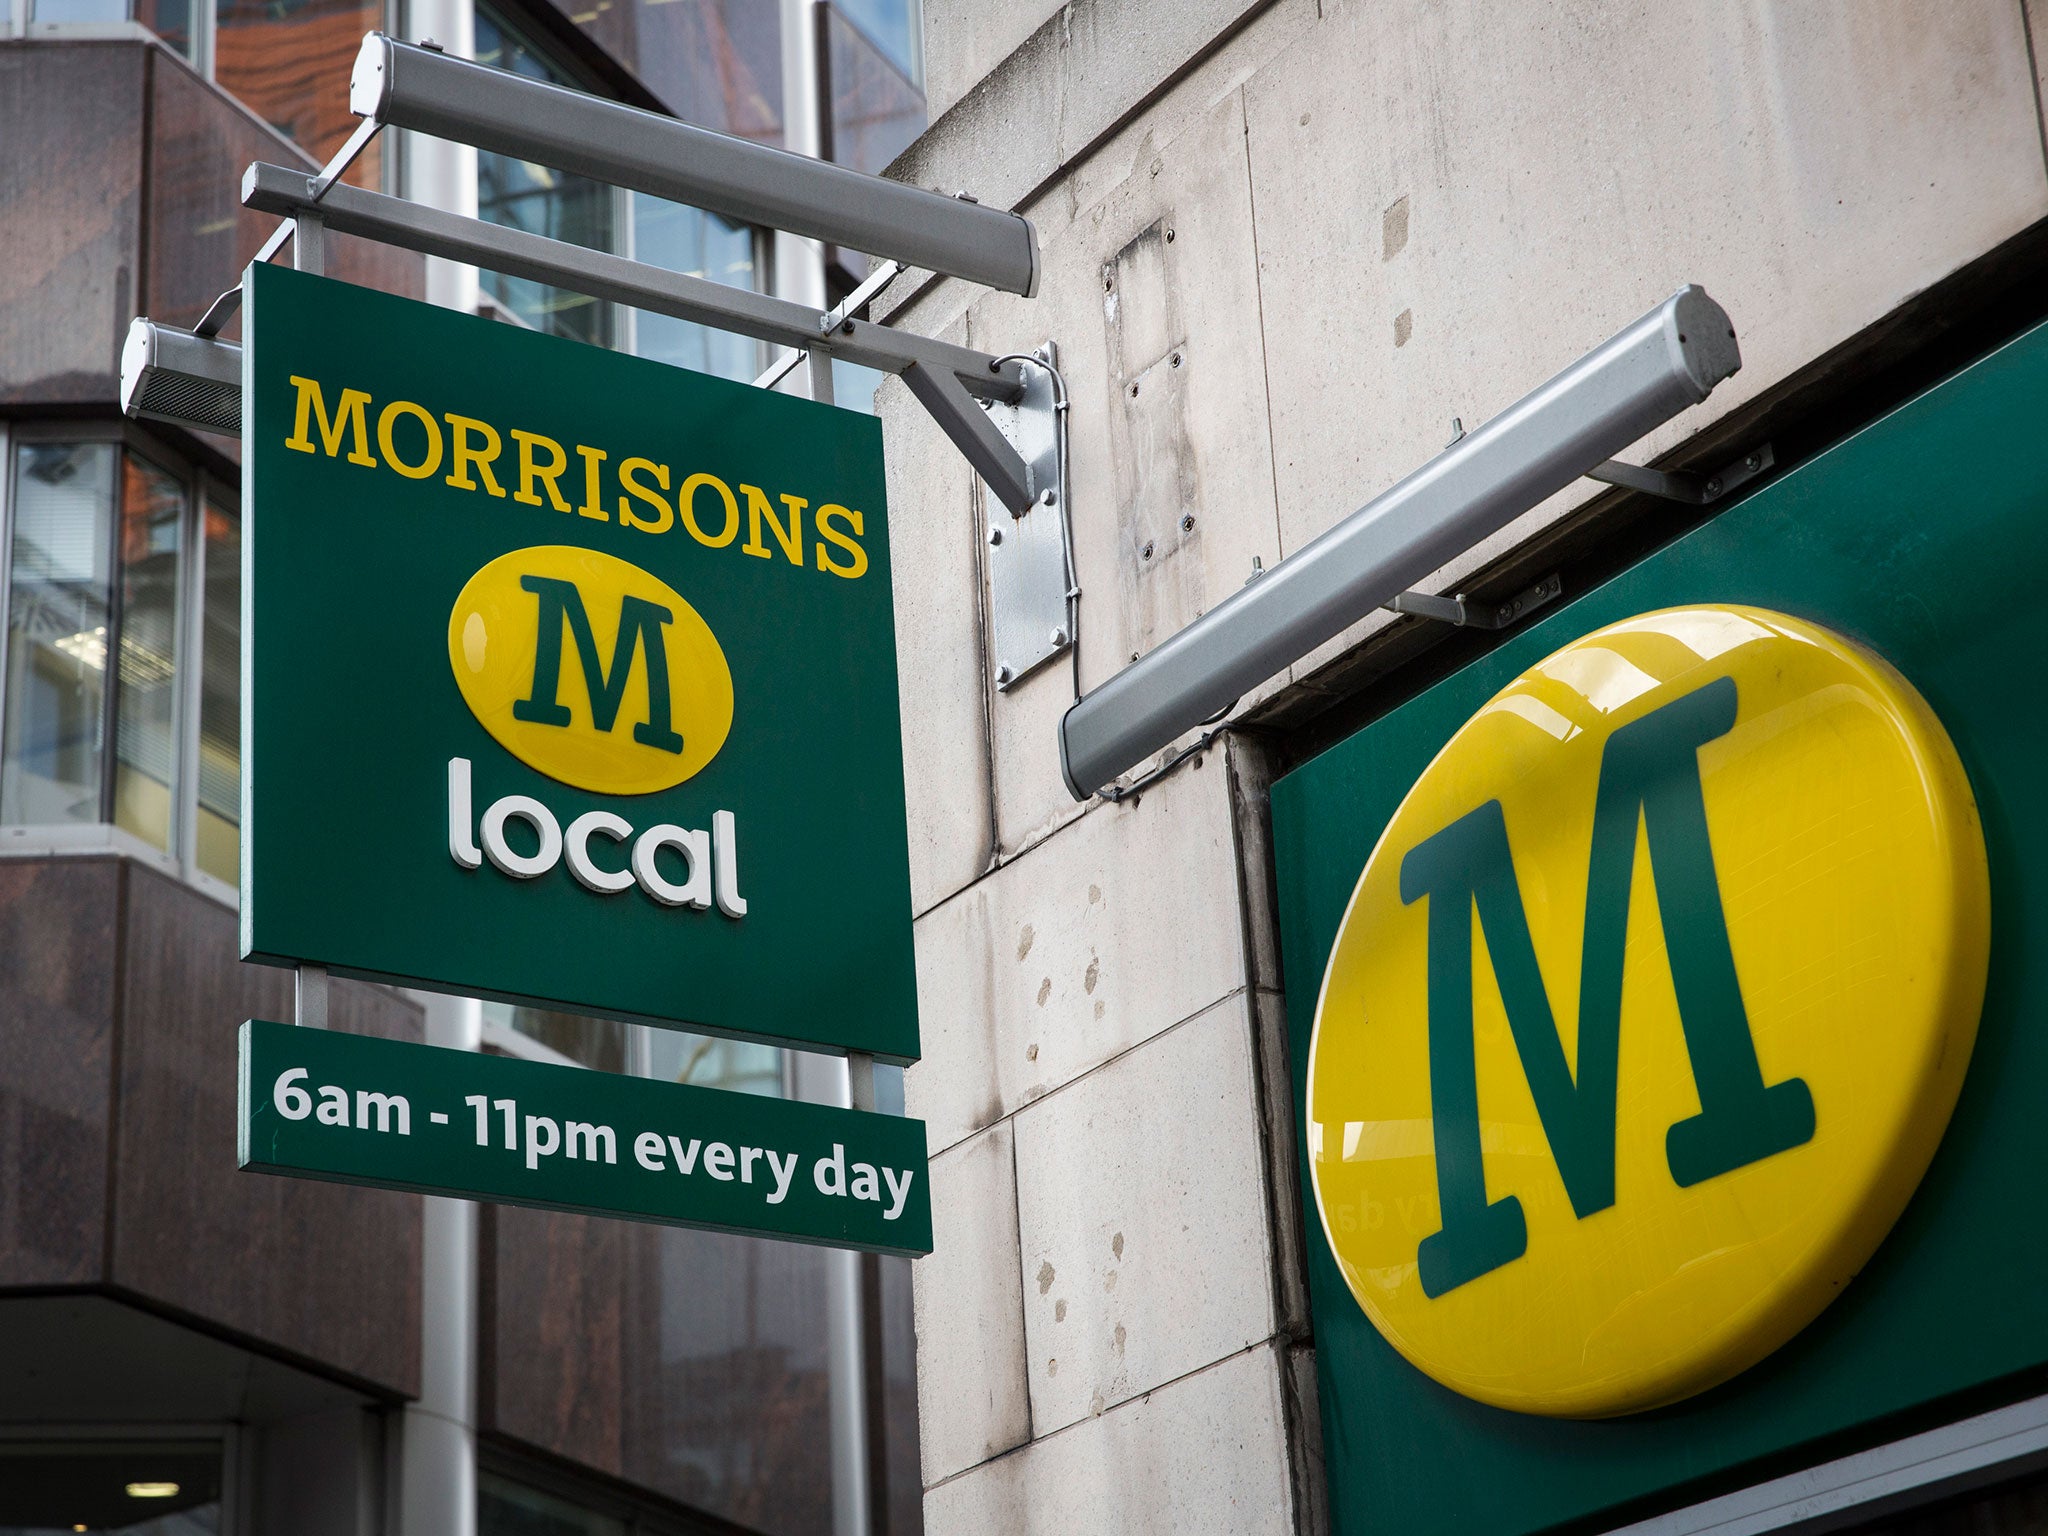 Morrisons reductions are the latest round of s supermarket price war